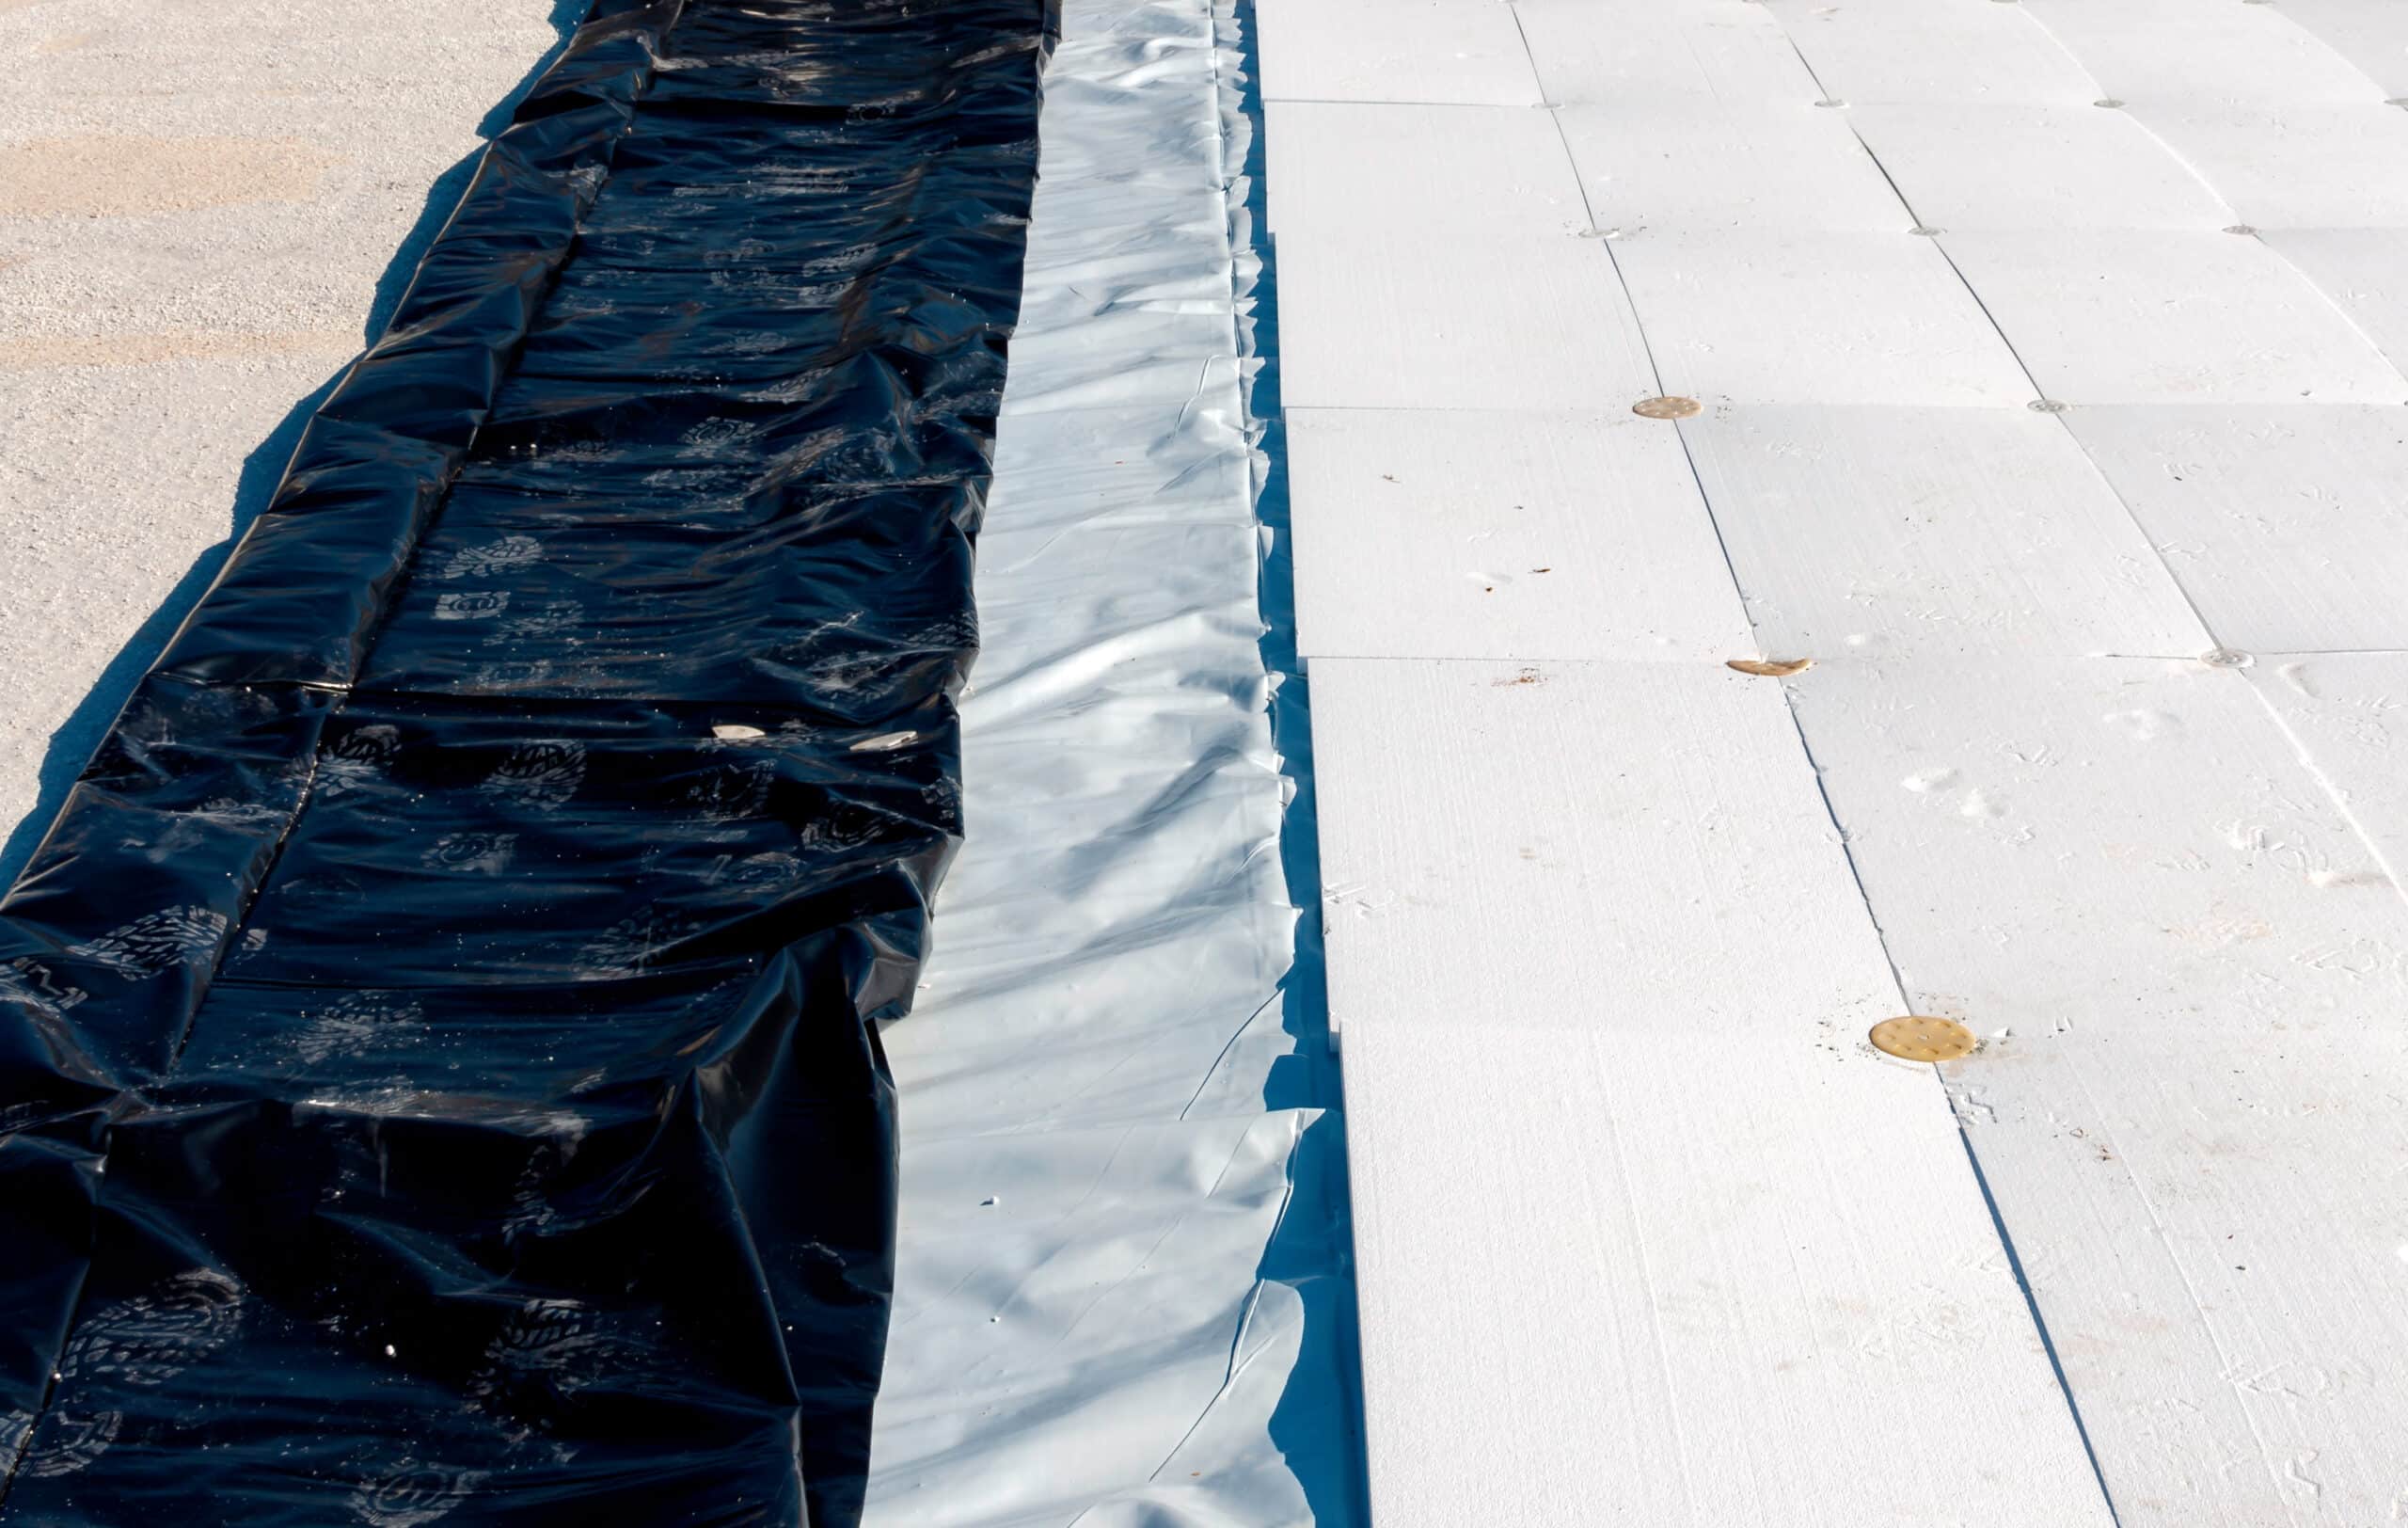 stratigraphy of the materials to waterproof a terrace in a new building with the following products: 4 mm PVC, polystyrene, non-woven fabric and 2 mm polyethylene